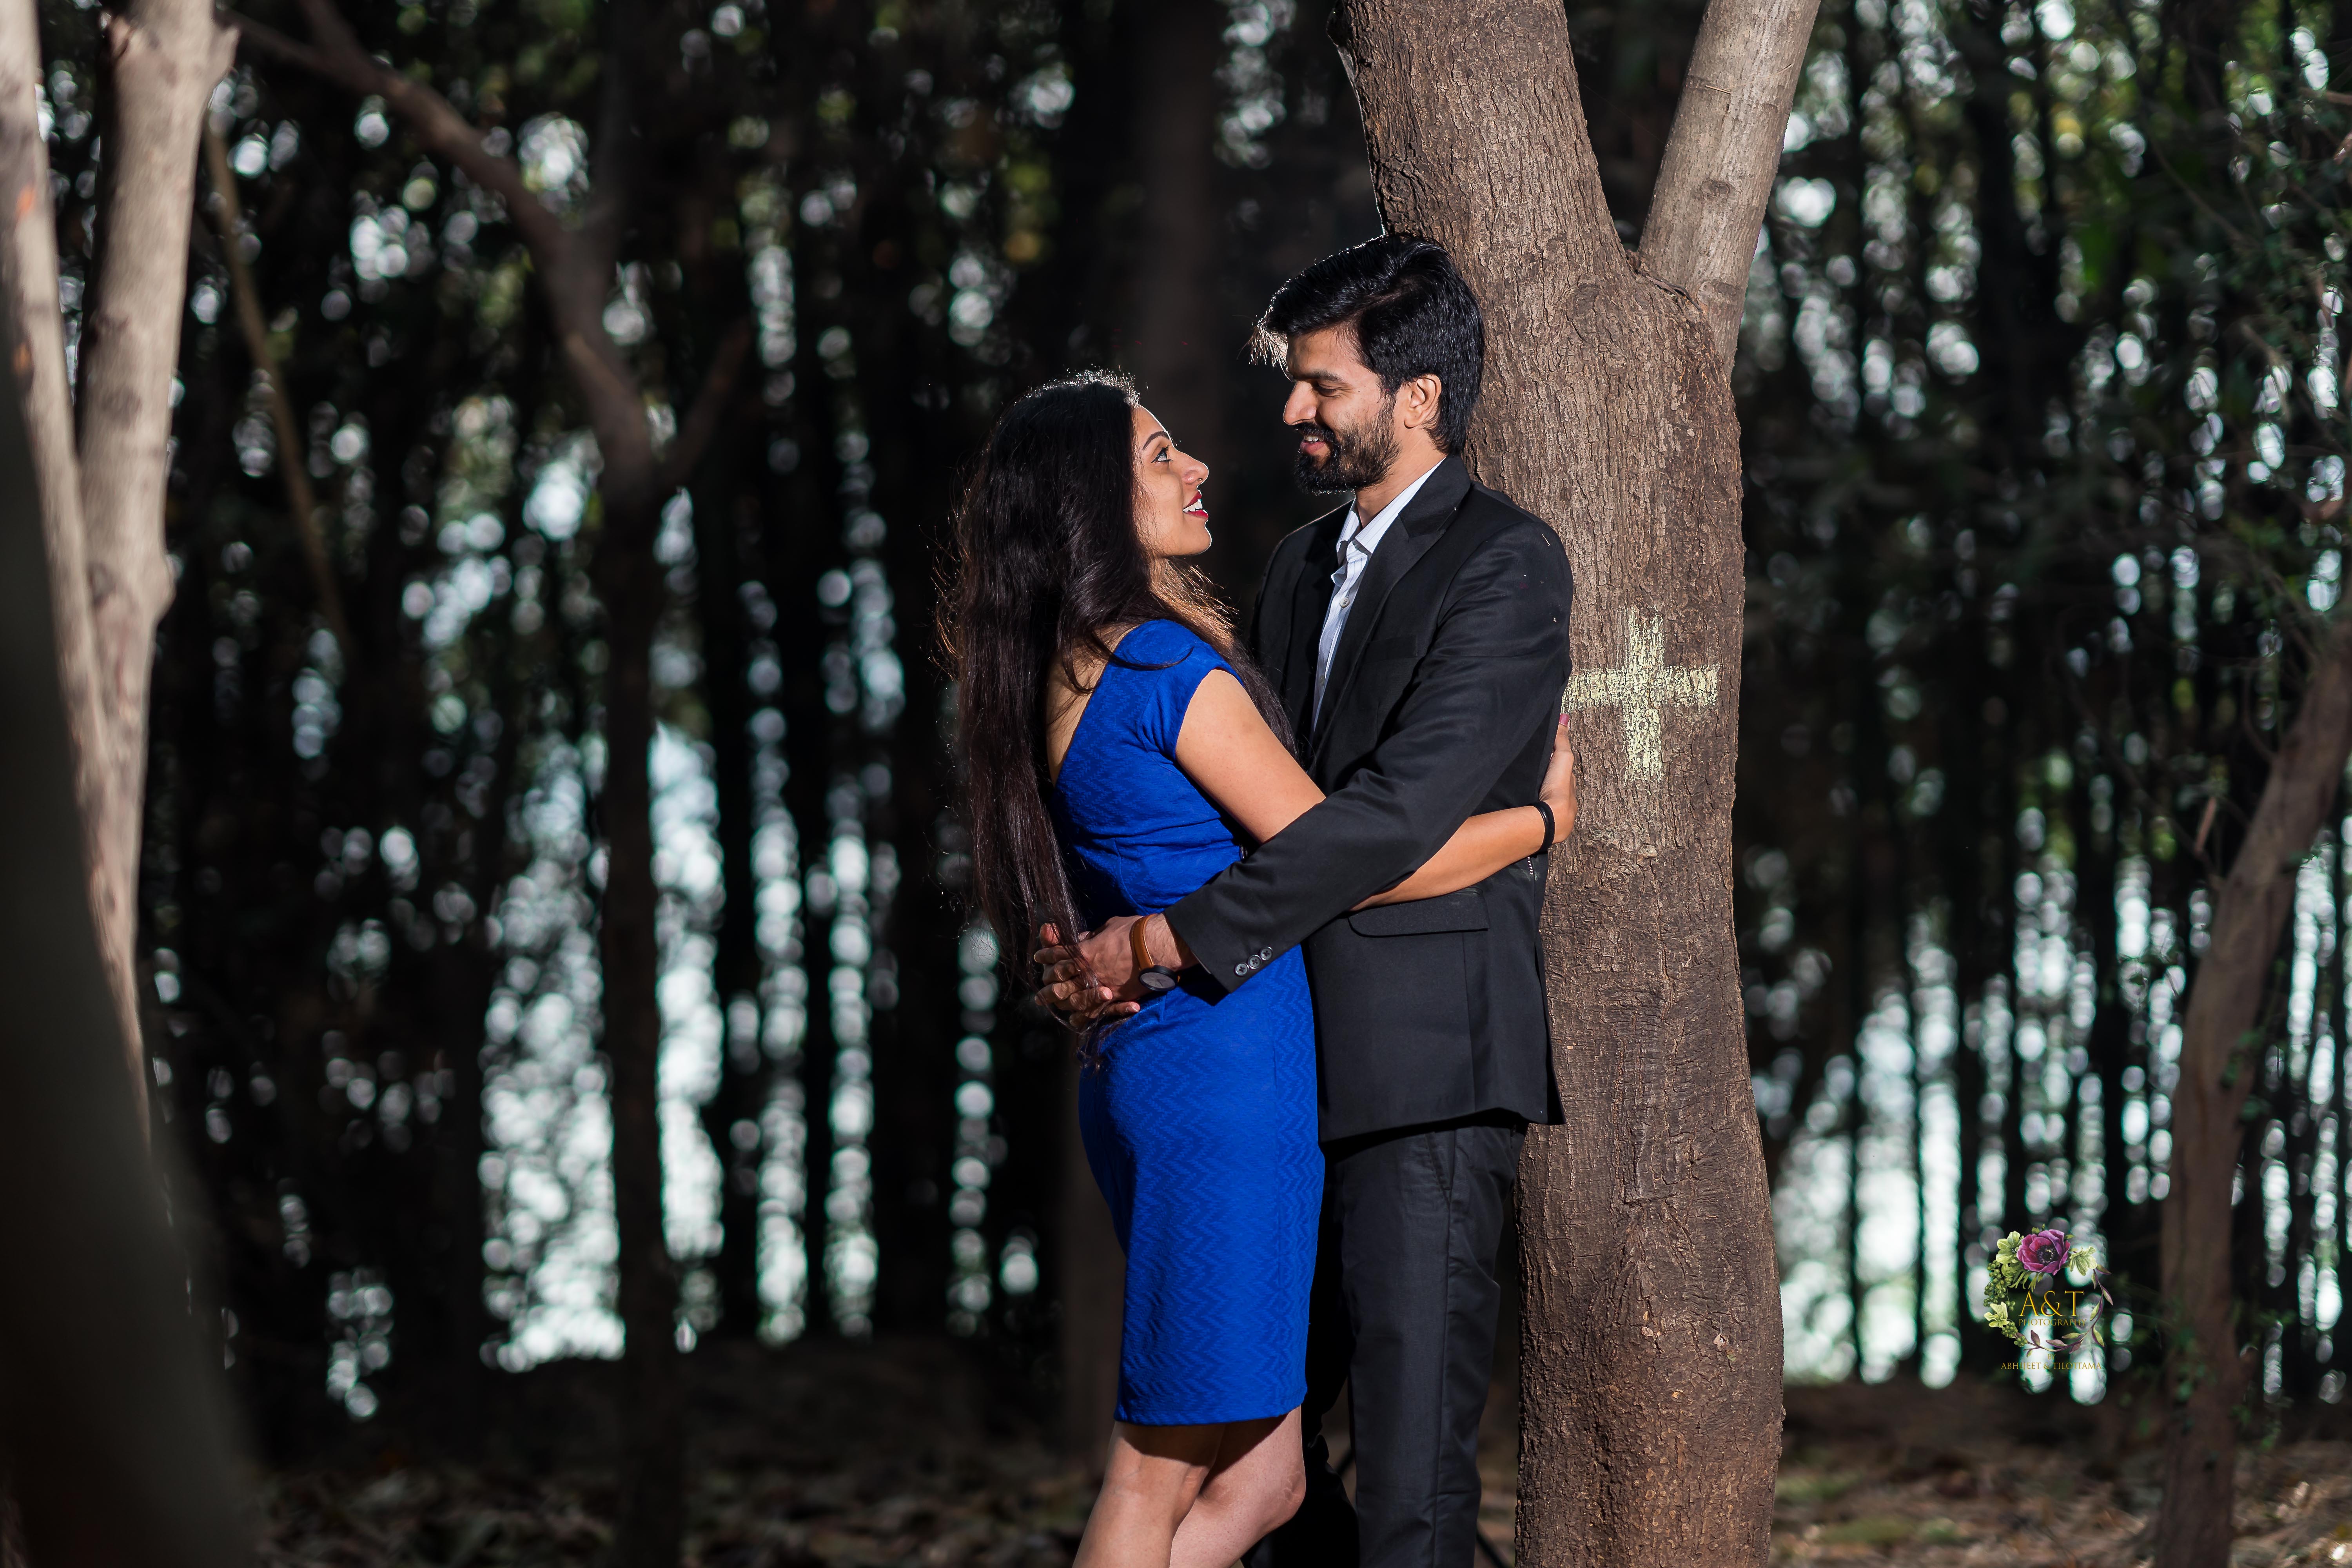 Heena-Vikas standing near a tree for their pre wedding photoshoot by top wedding photographer in pune